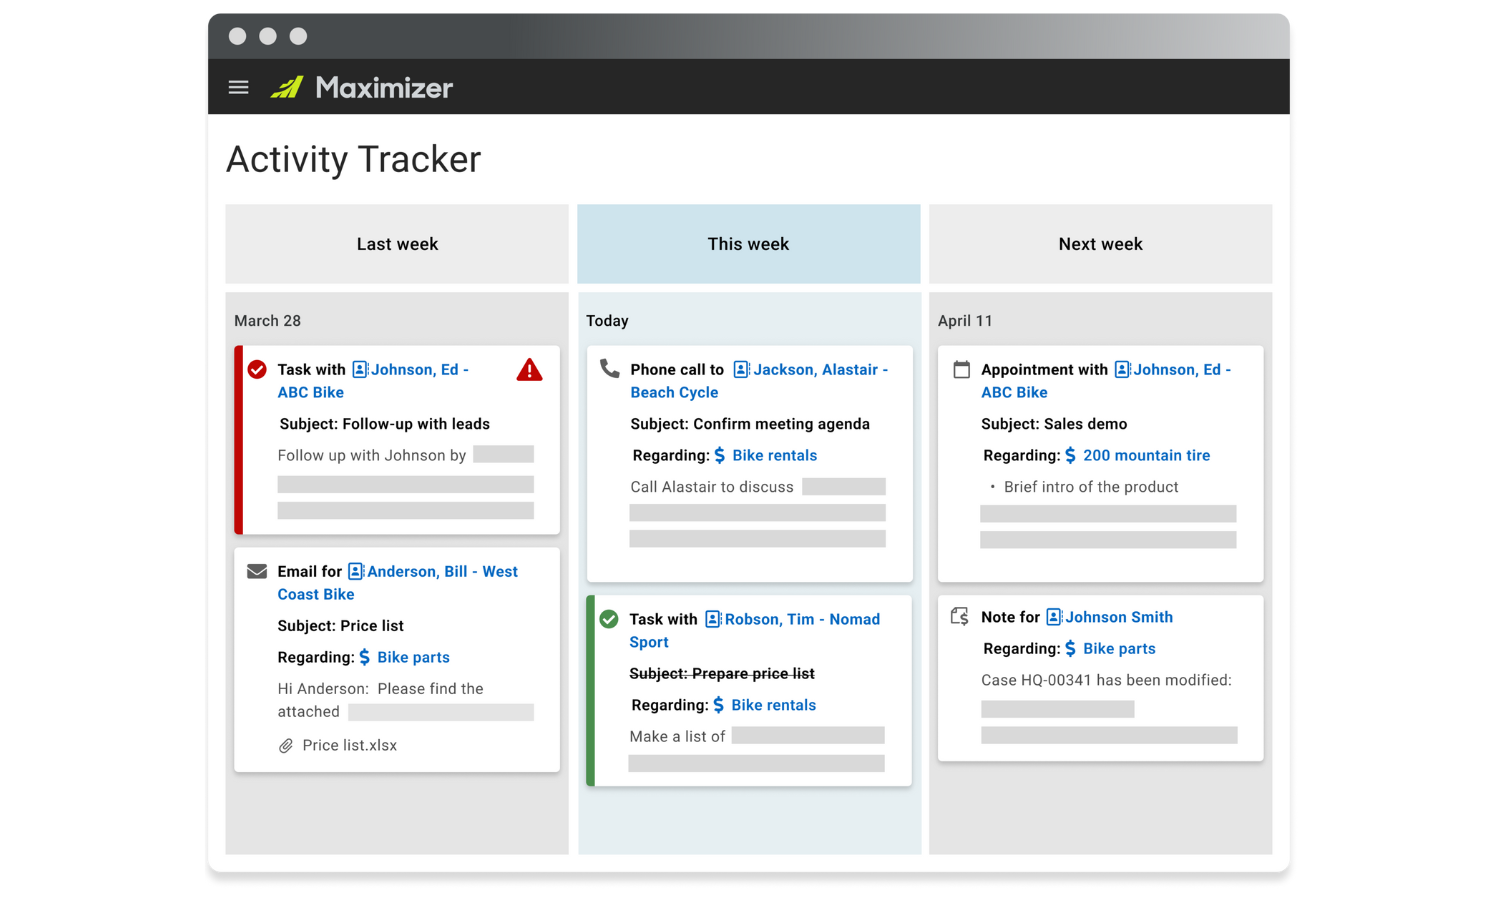 Activity Tracker enables Sales Leaders to see a real-time list of their company's communication activities.